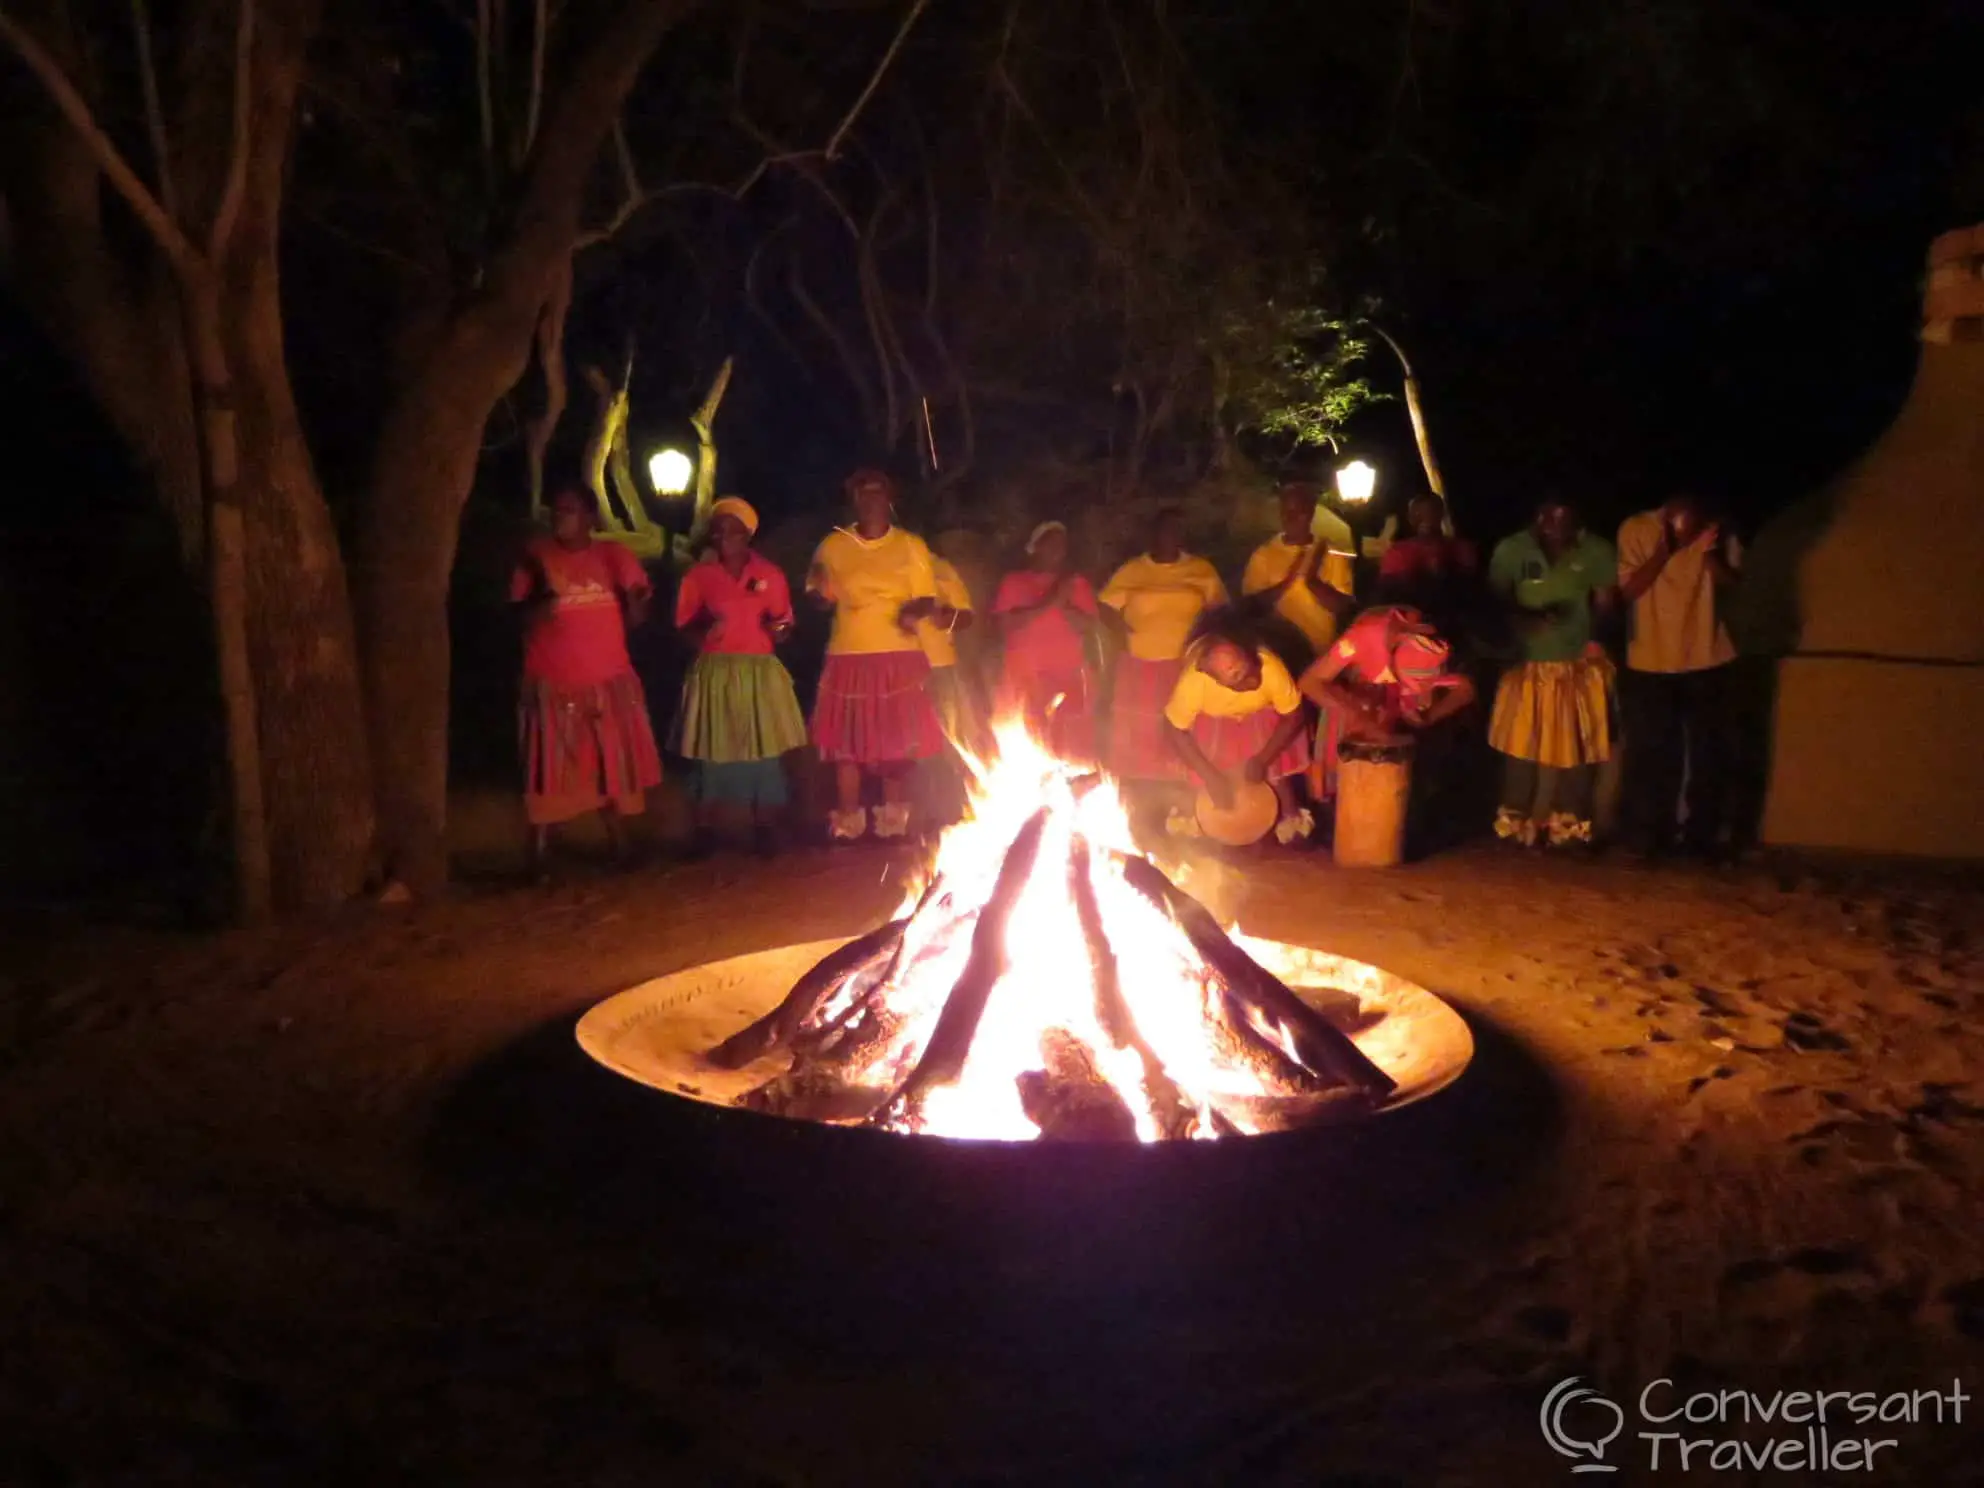 The multi-talented staff show us a thing or two about singing and dancing during dinner at Ulusaba